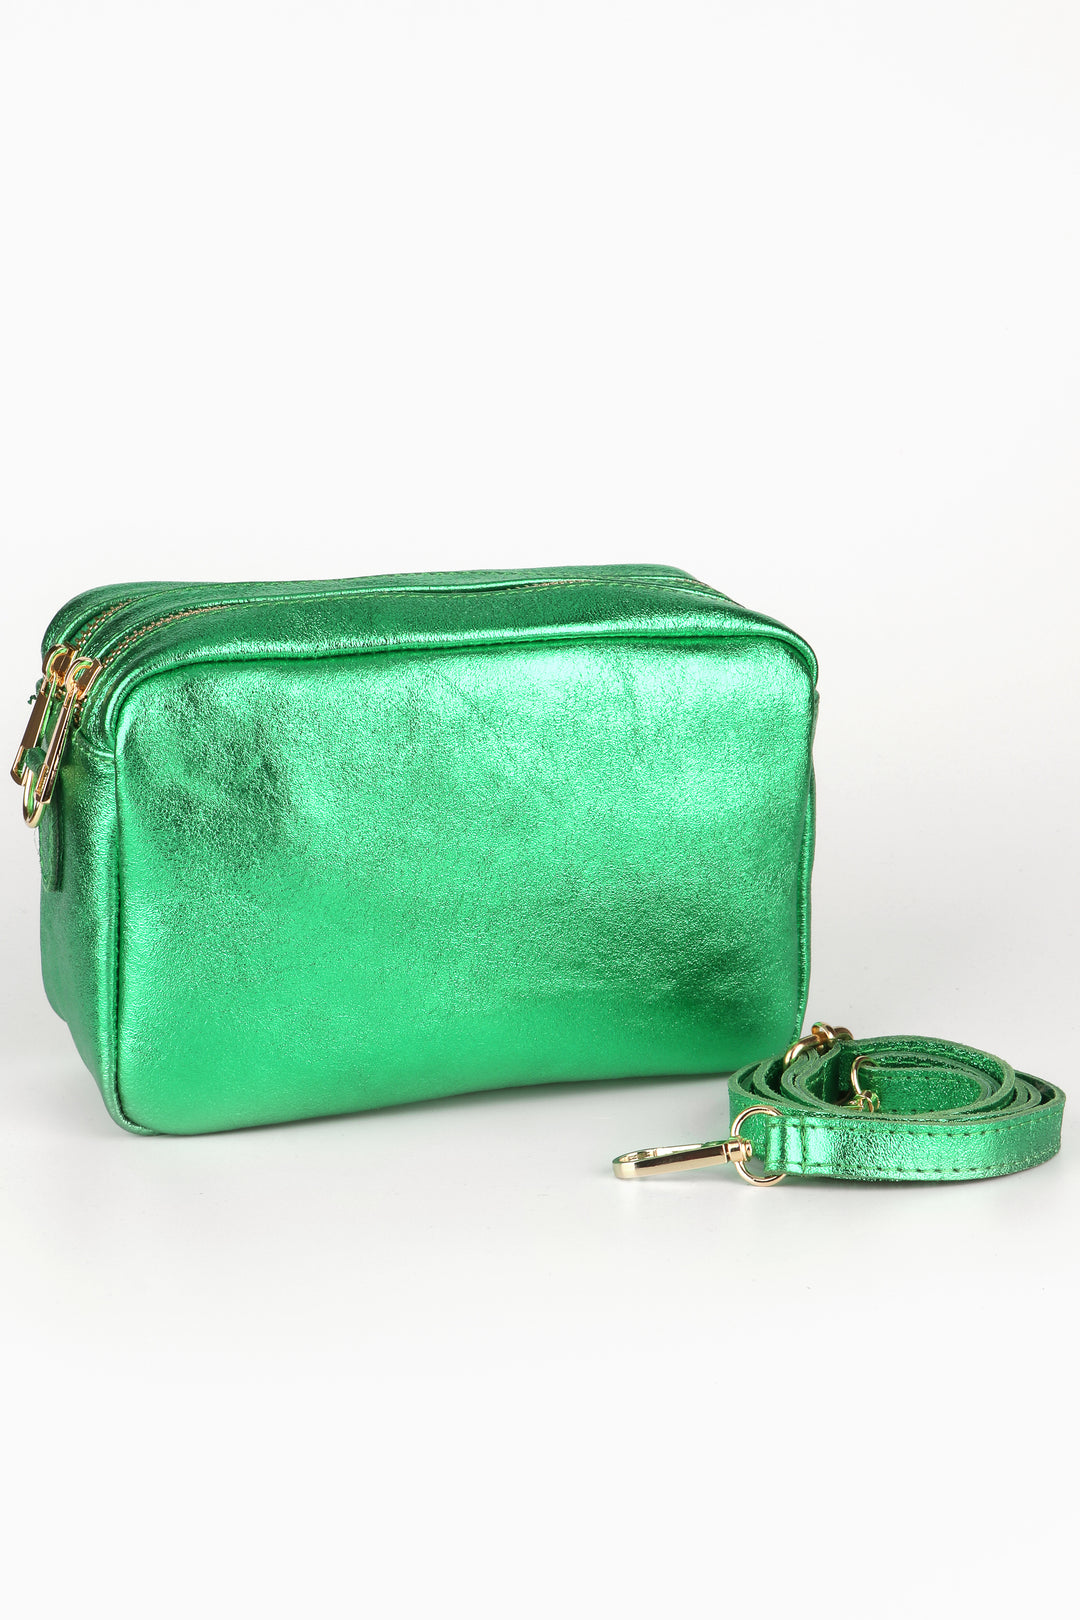 metallic green leather cross body camera bag with a matching detachable bag strap and two zip closing compartments